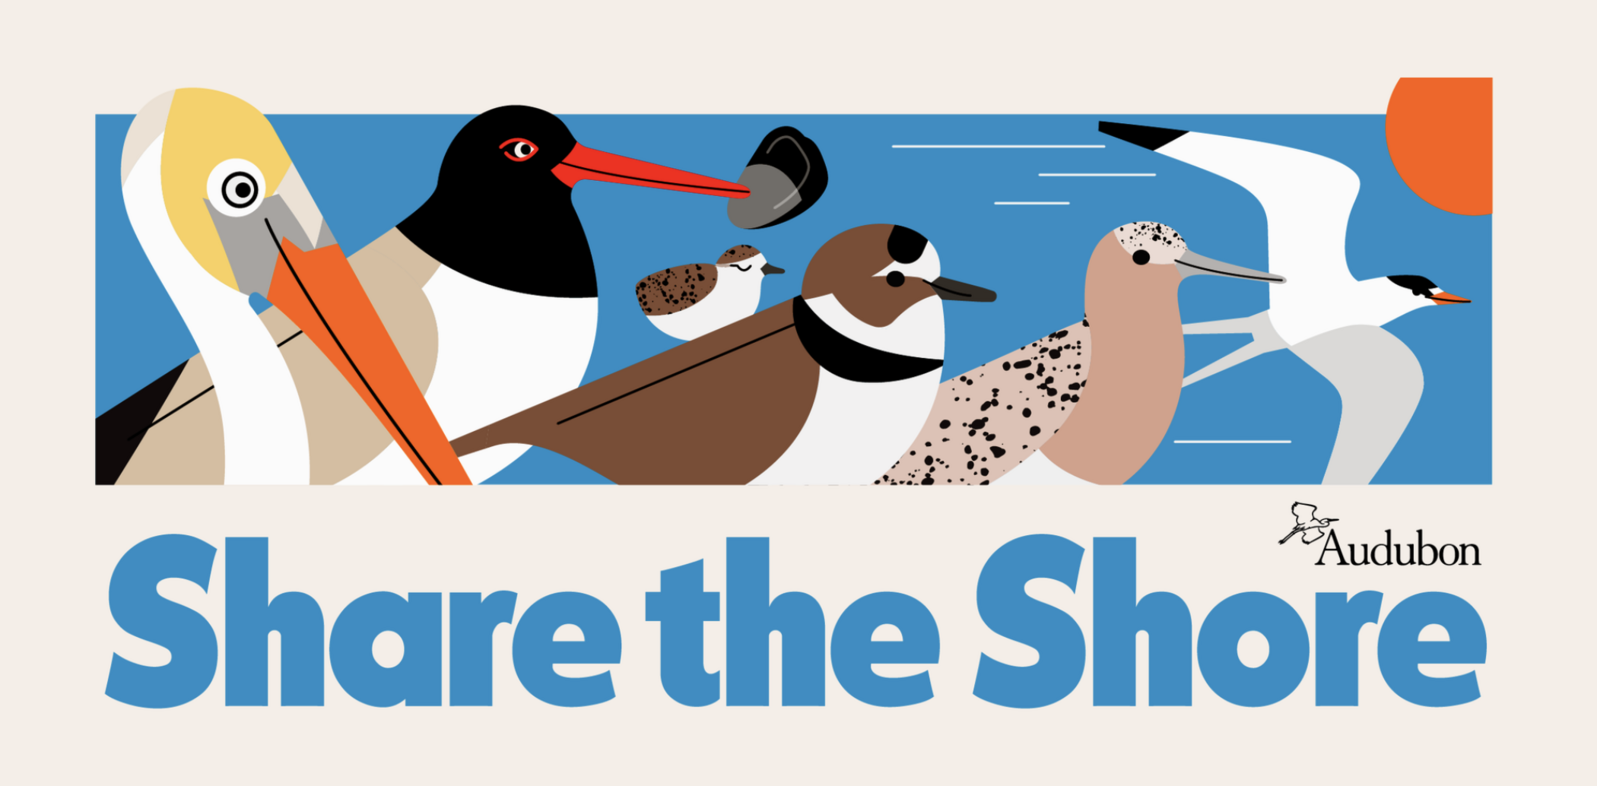 A graphic depicting renderings of coastal birds, including a Brown Pelican, American Oystercatcher, Wilson's Plover, Least Tern, and Black Skimmer.